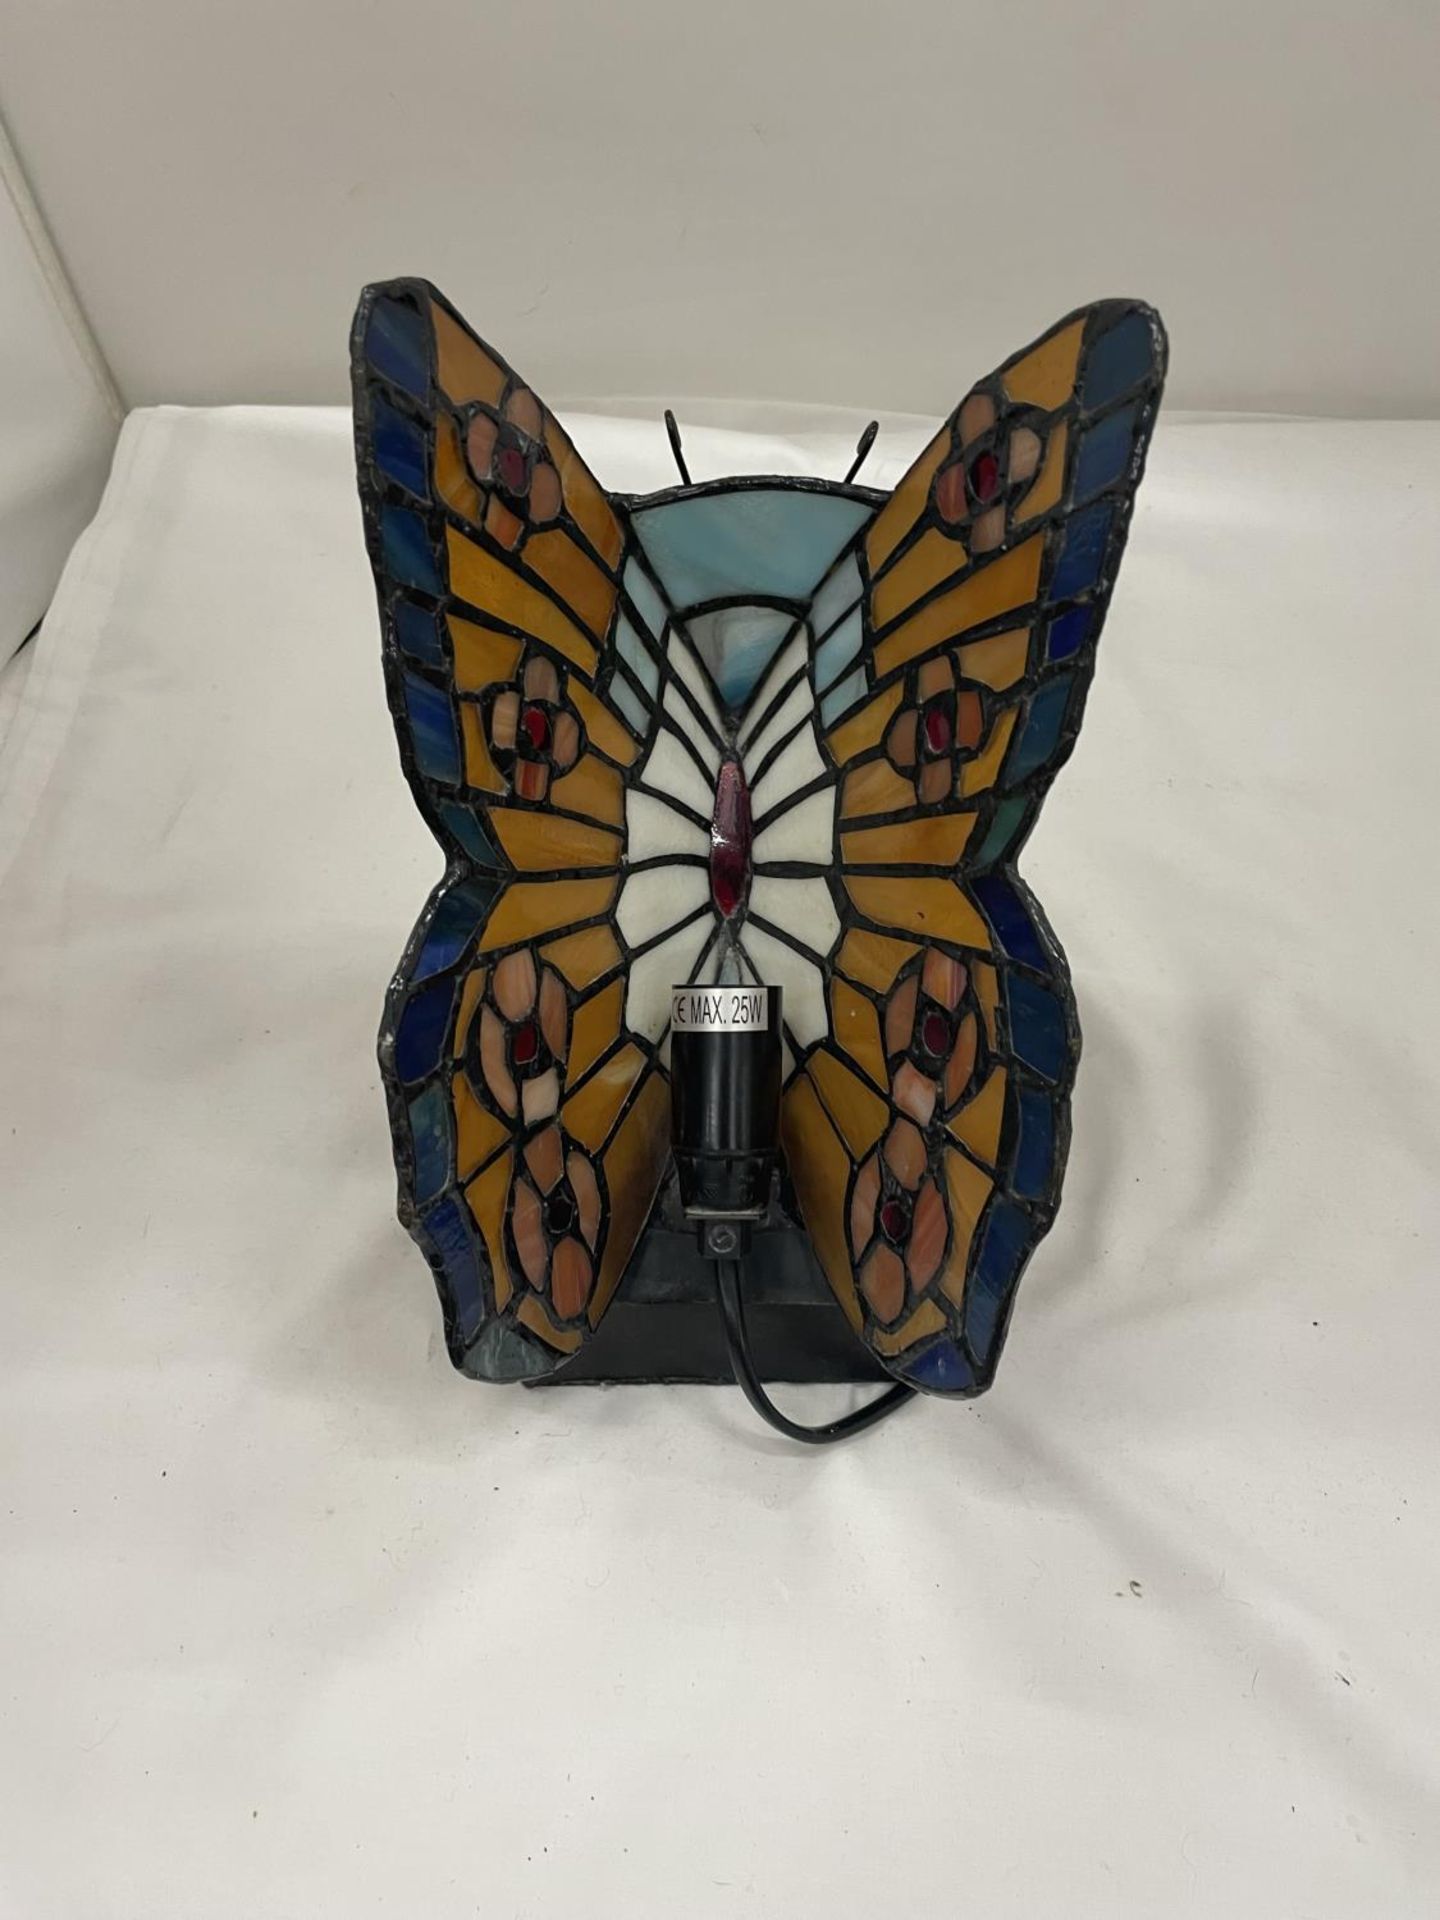 A TIFFANY STYLE BUTTERFLY LAMP HEIGHT 25CM - Image 2 of 4